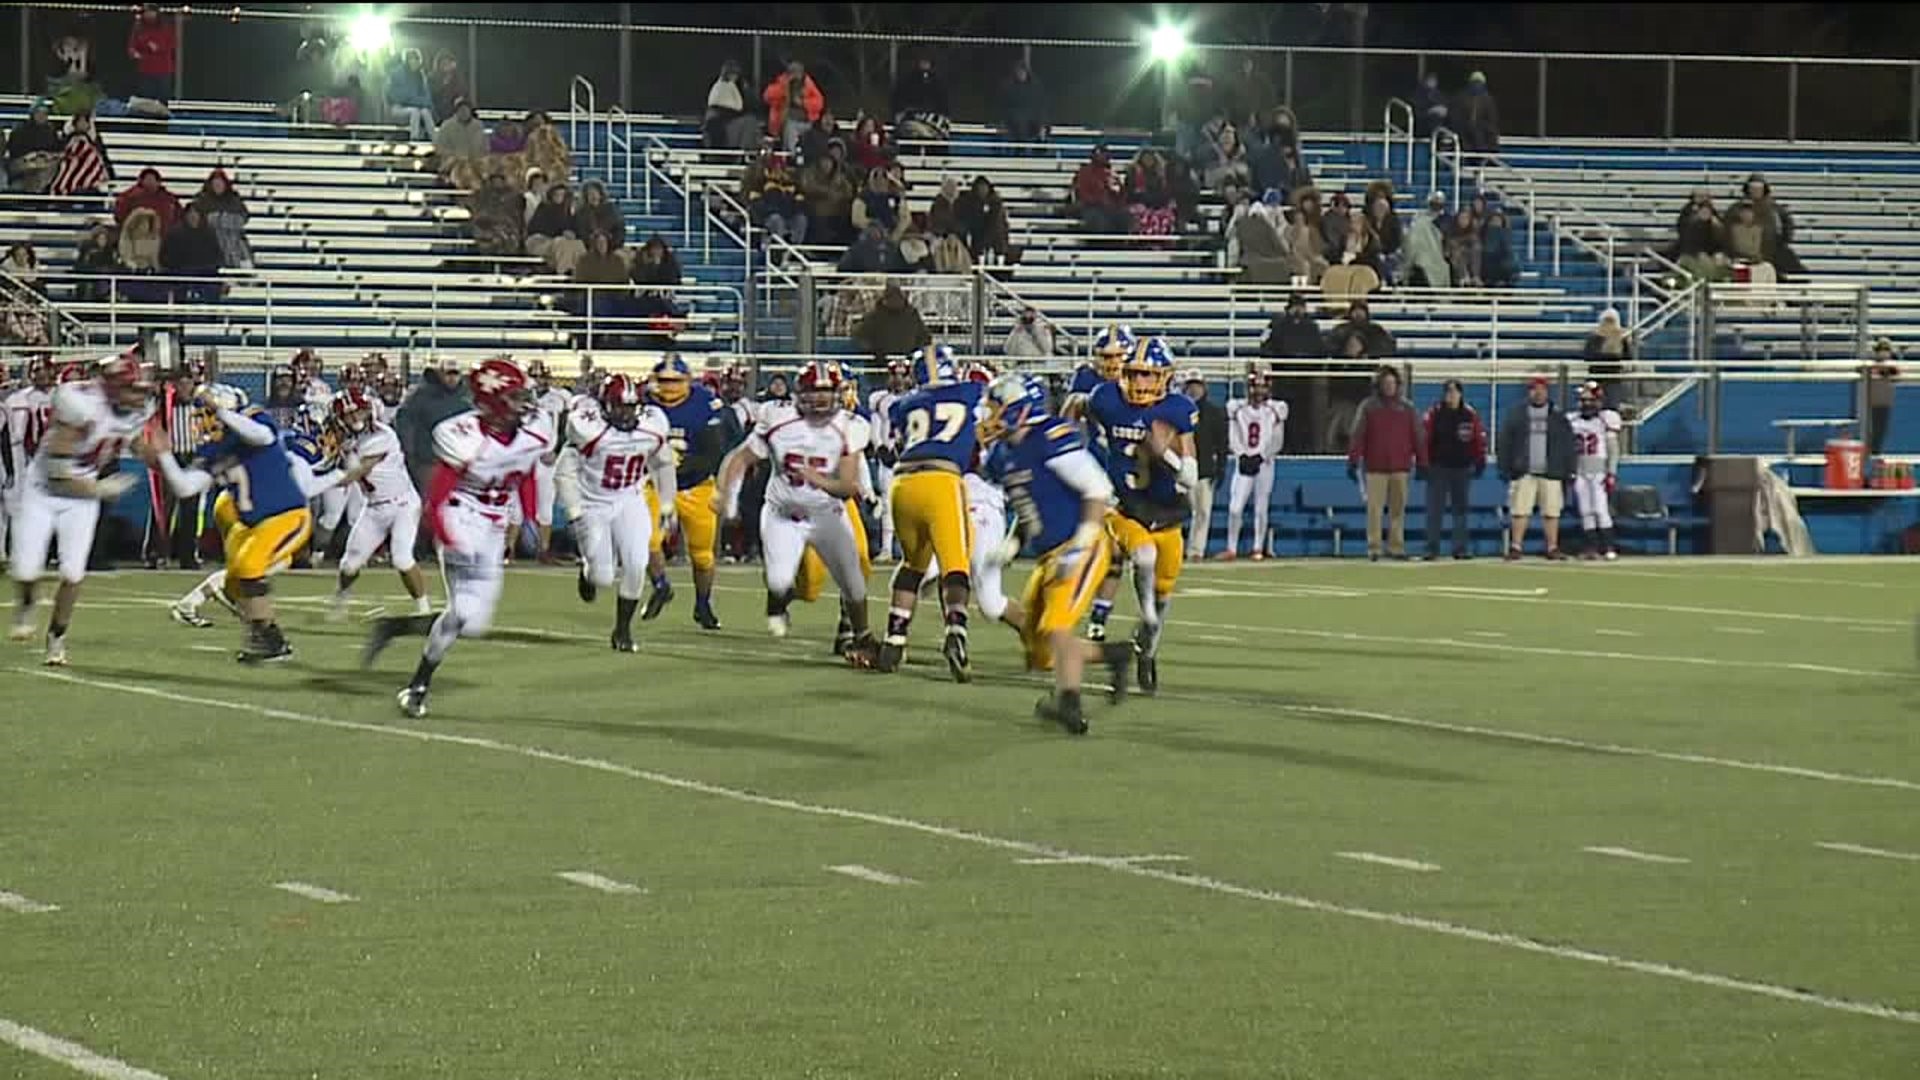 Valley View Travels To Berwick To Face The Dawgs Friday Night